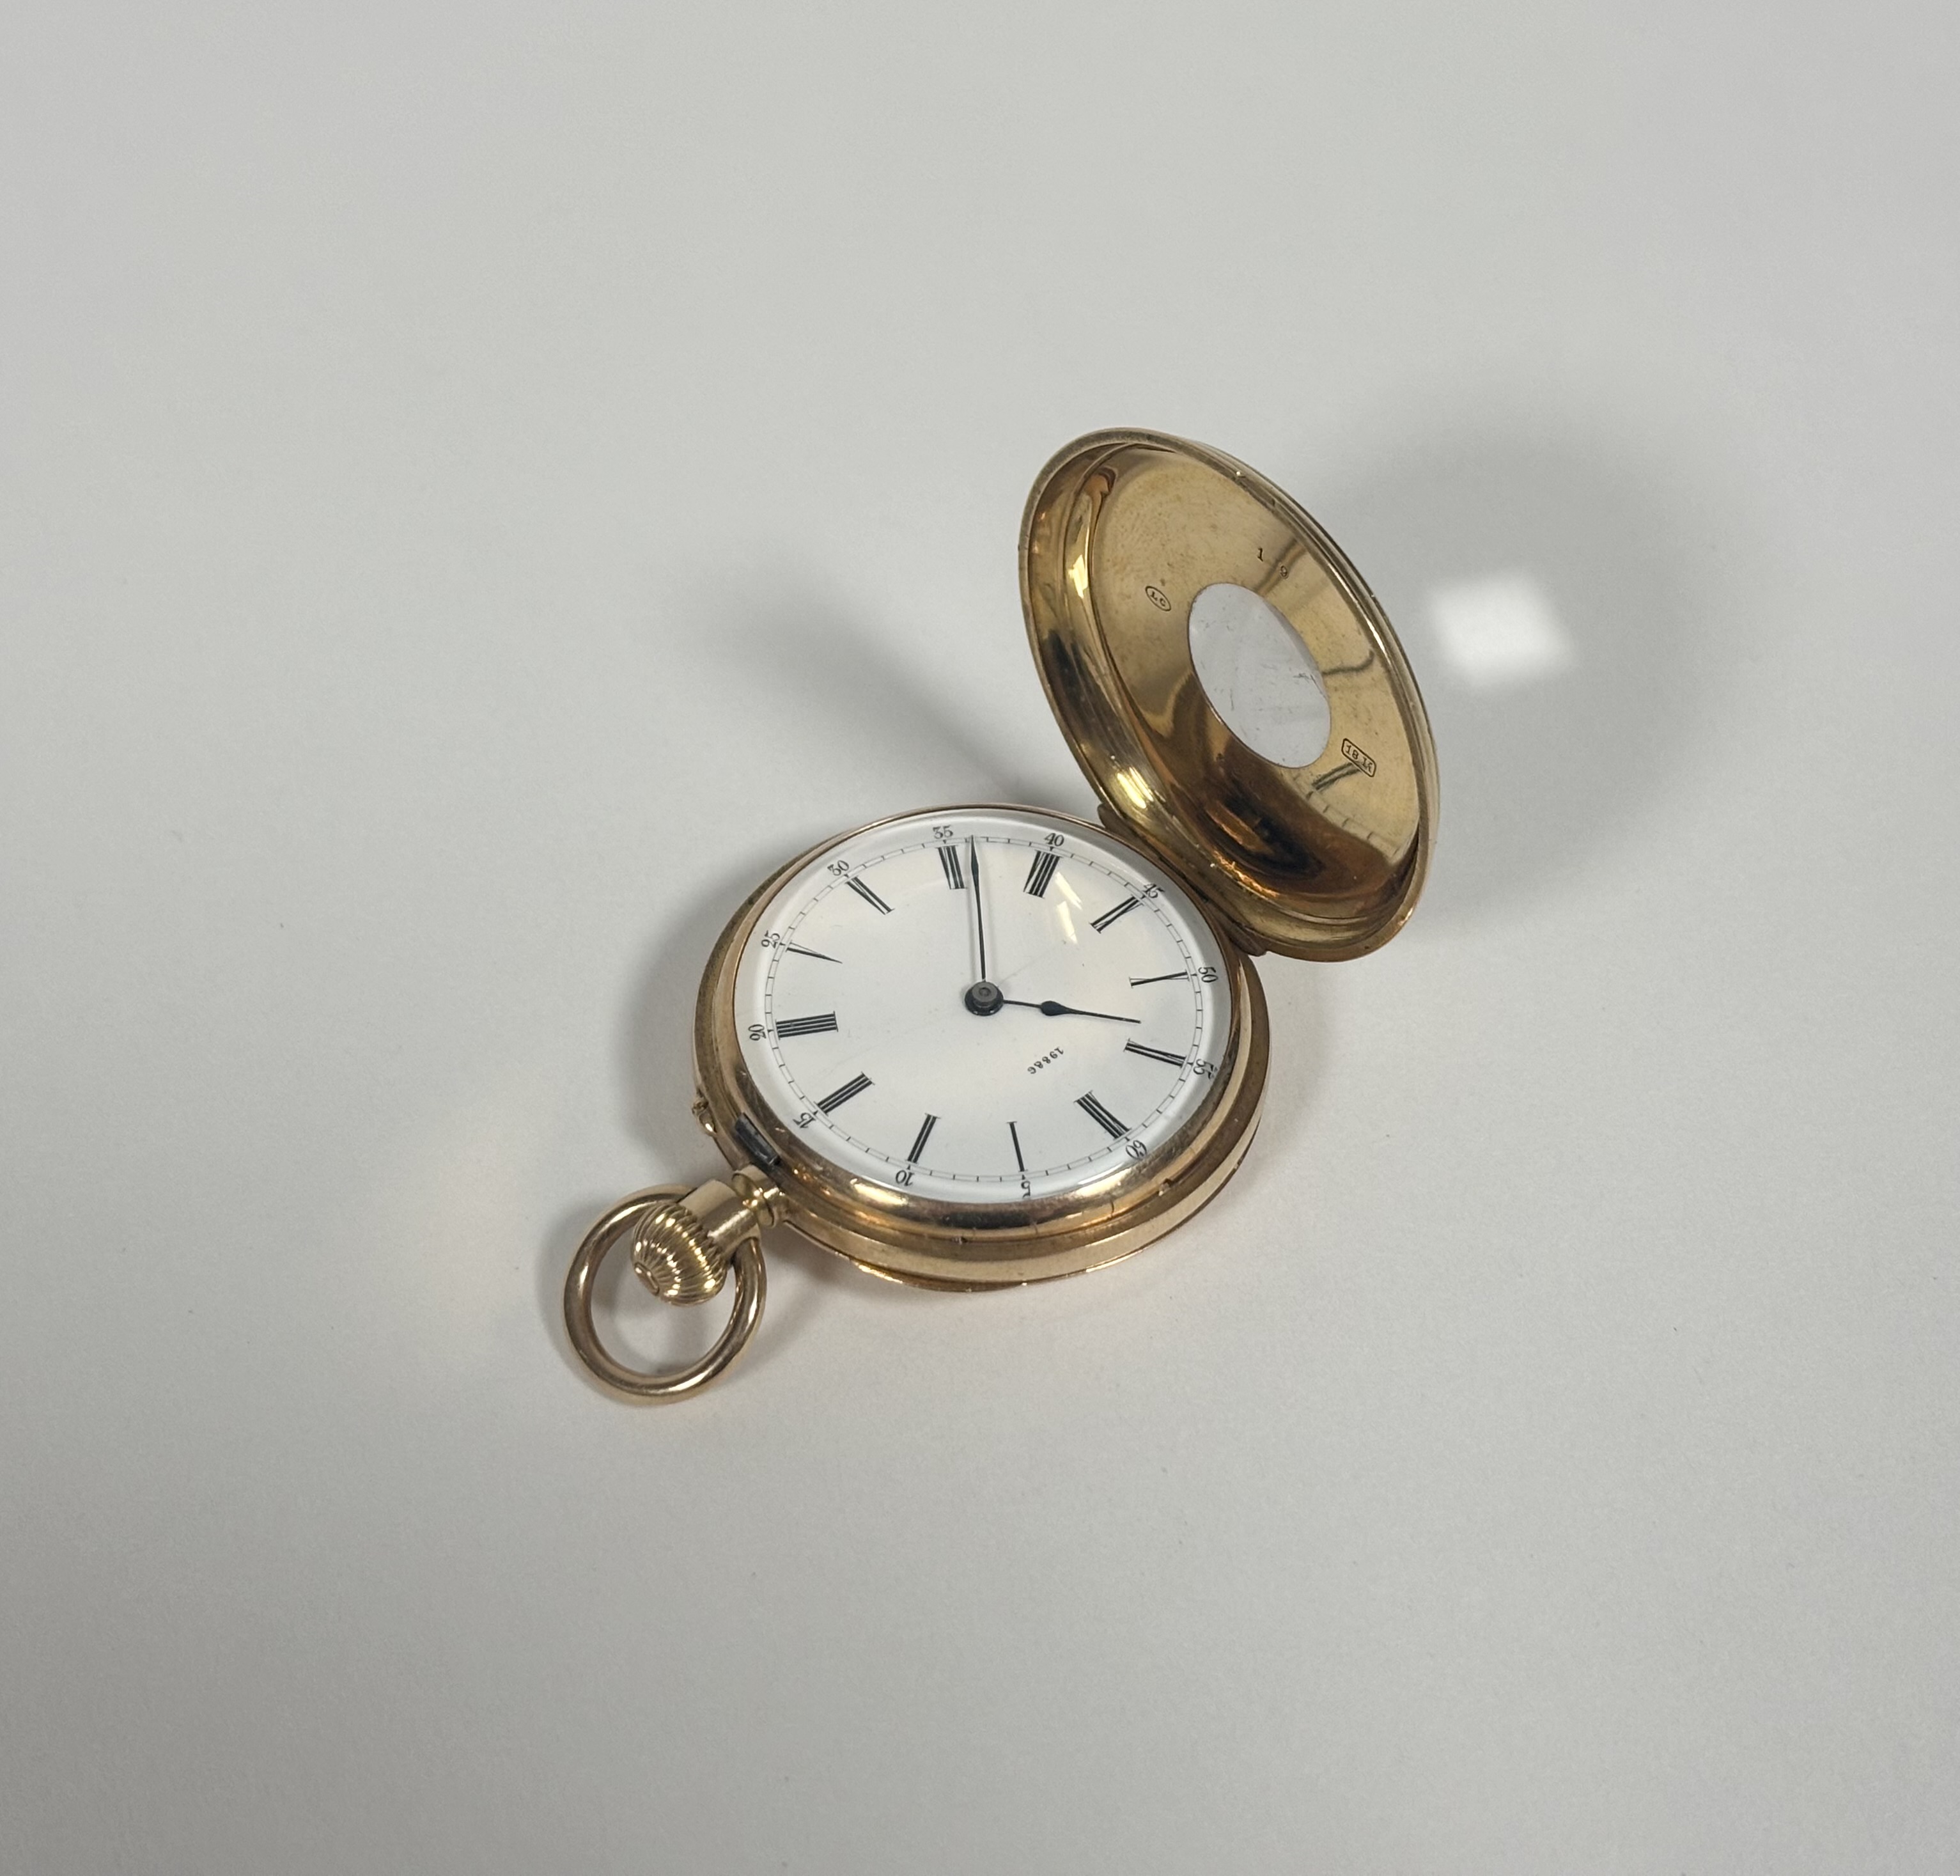 An 18ct gold and enamel small half-hunter fob watch, late 19th century - Image 3 of 4